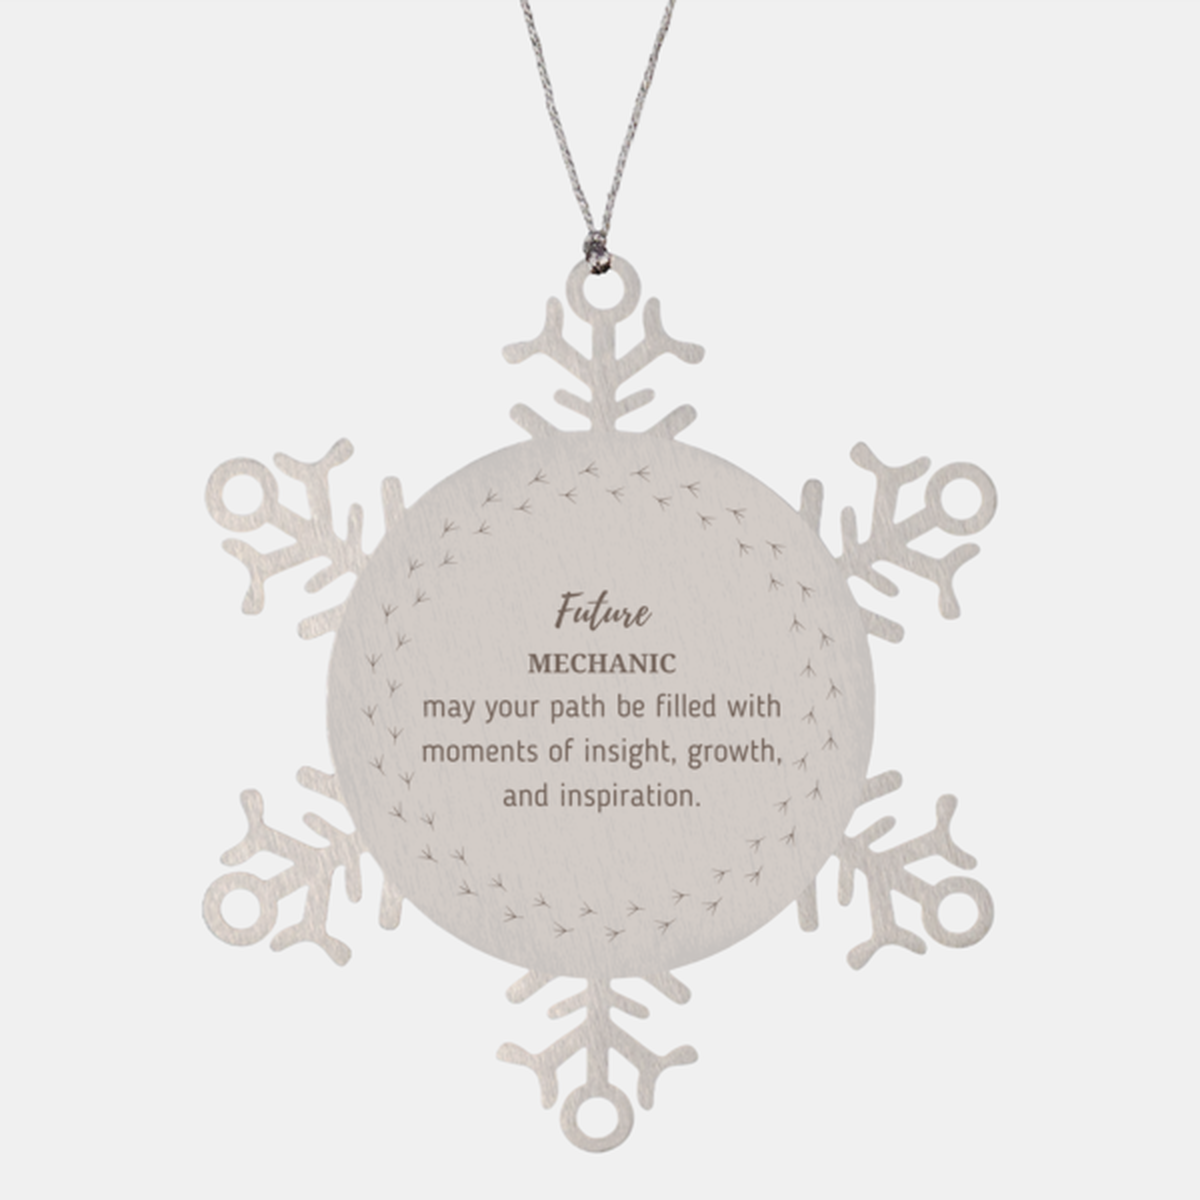 Future Mechanic Gifts, May your path be filled with moments of insight, Graduation Gifts for New Mechanic, Christmas Unique Snowflake Ornament For Men, Women, Friends